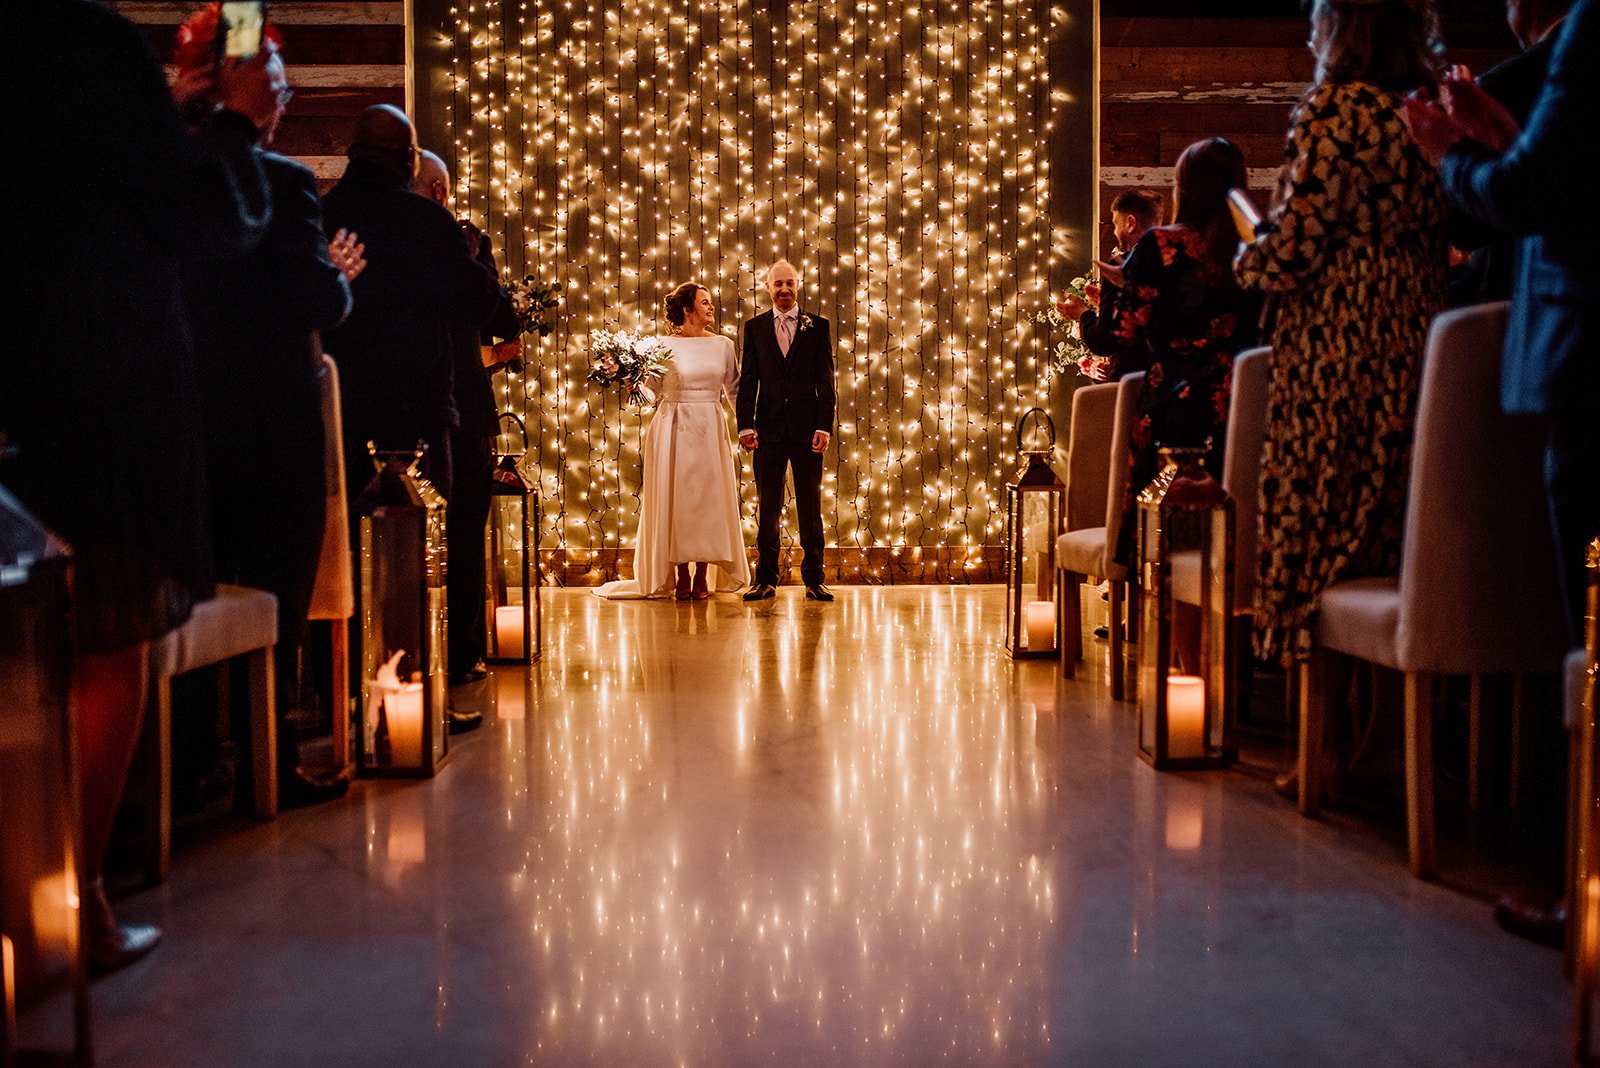 The bride and groom stood in front of the tonnes of fairy lights